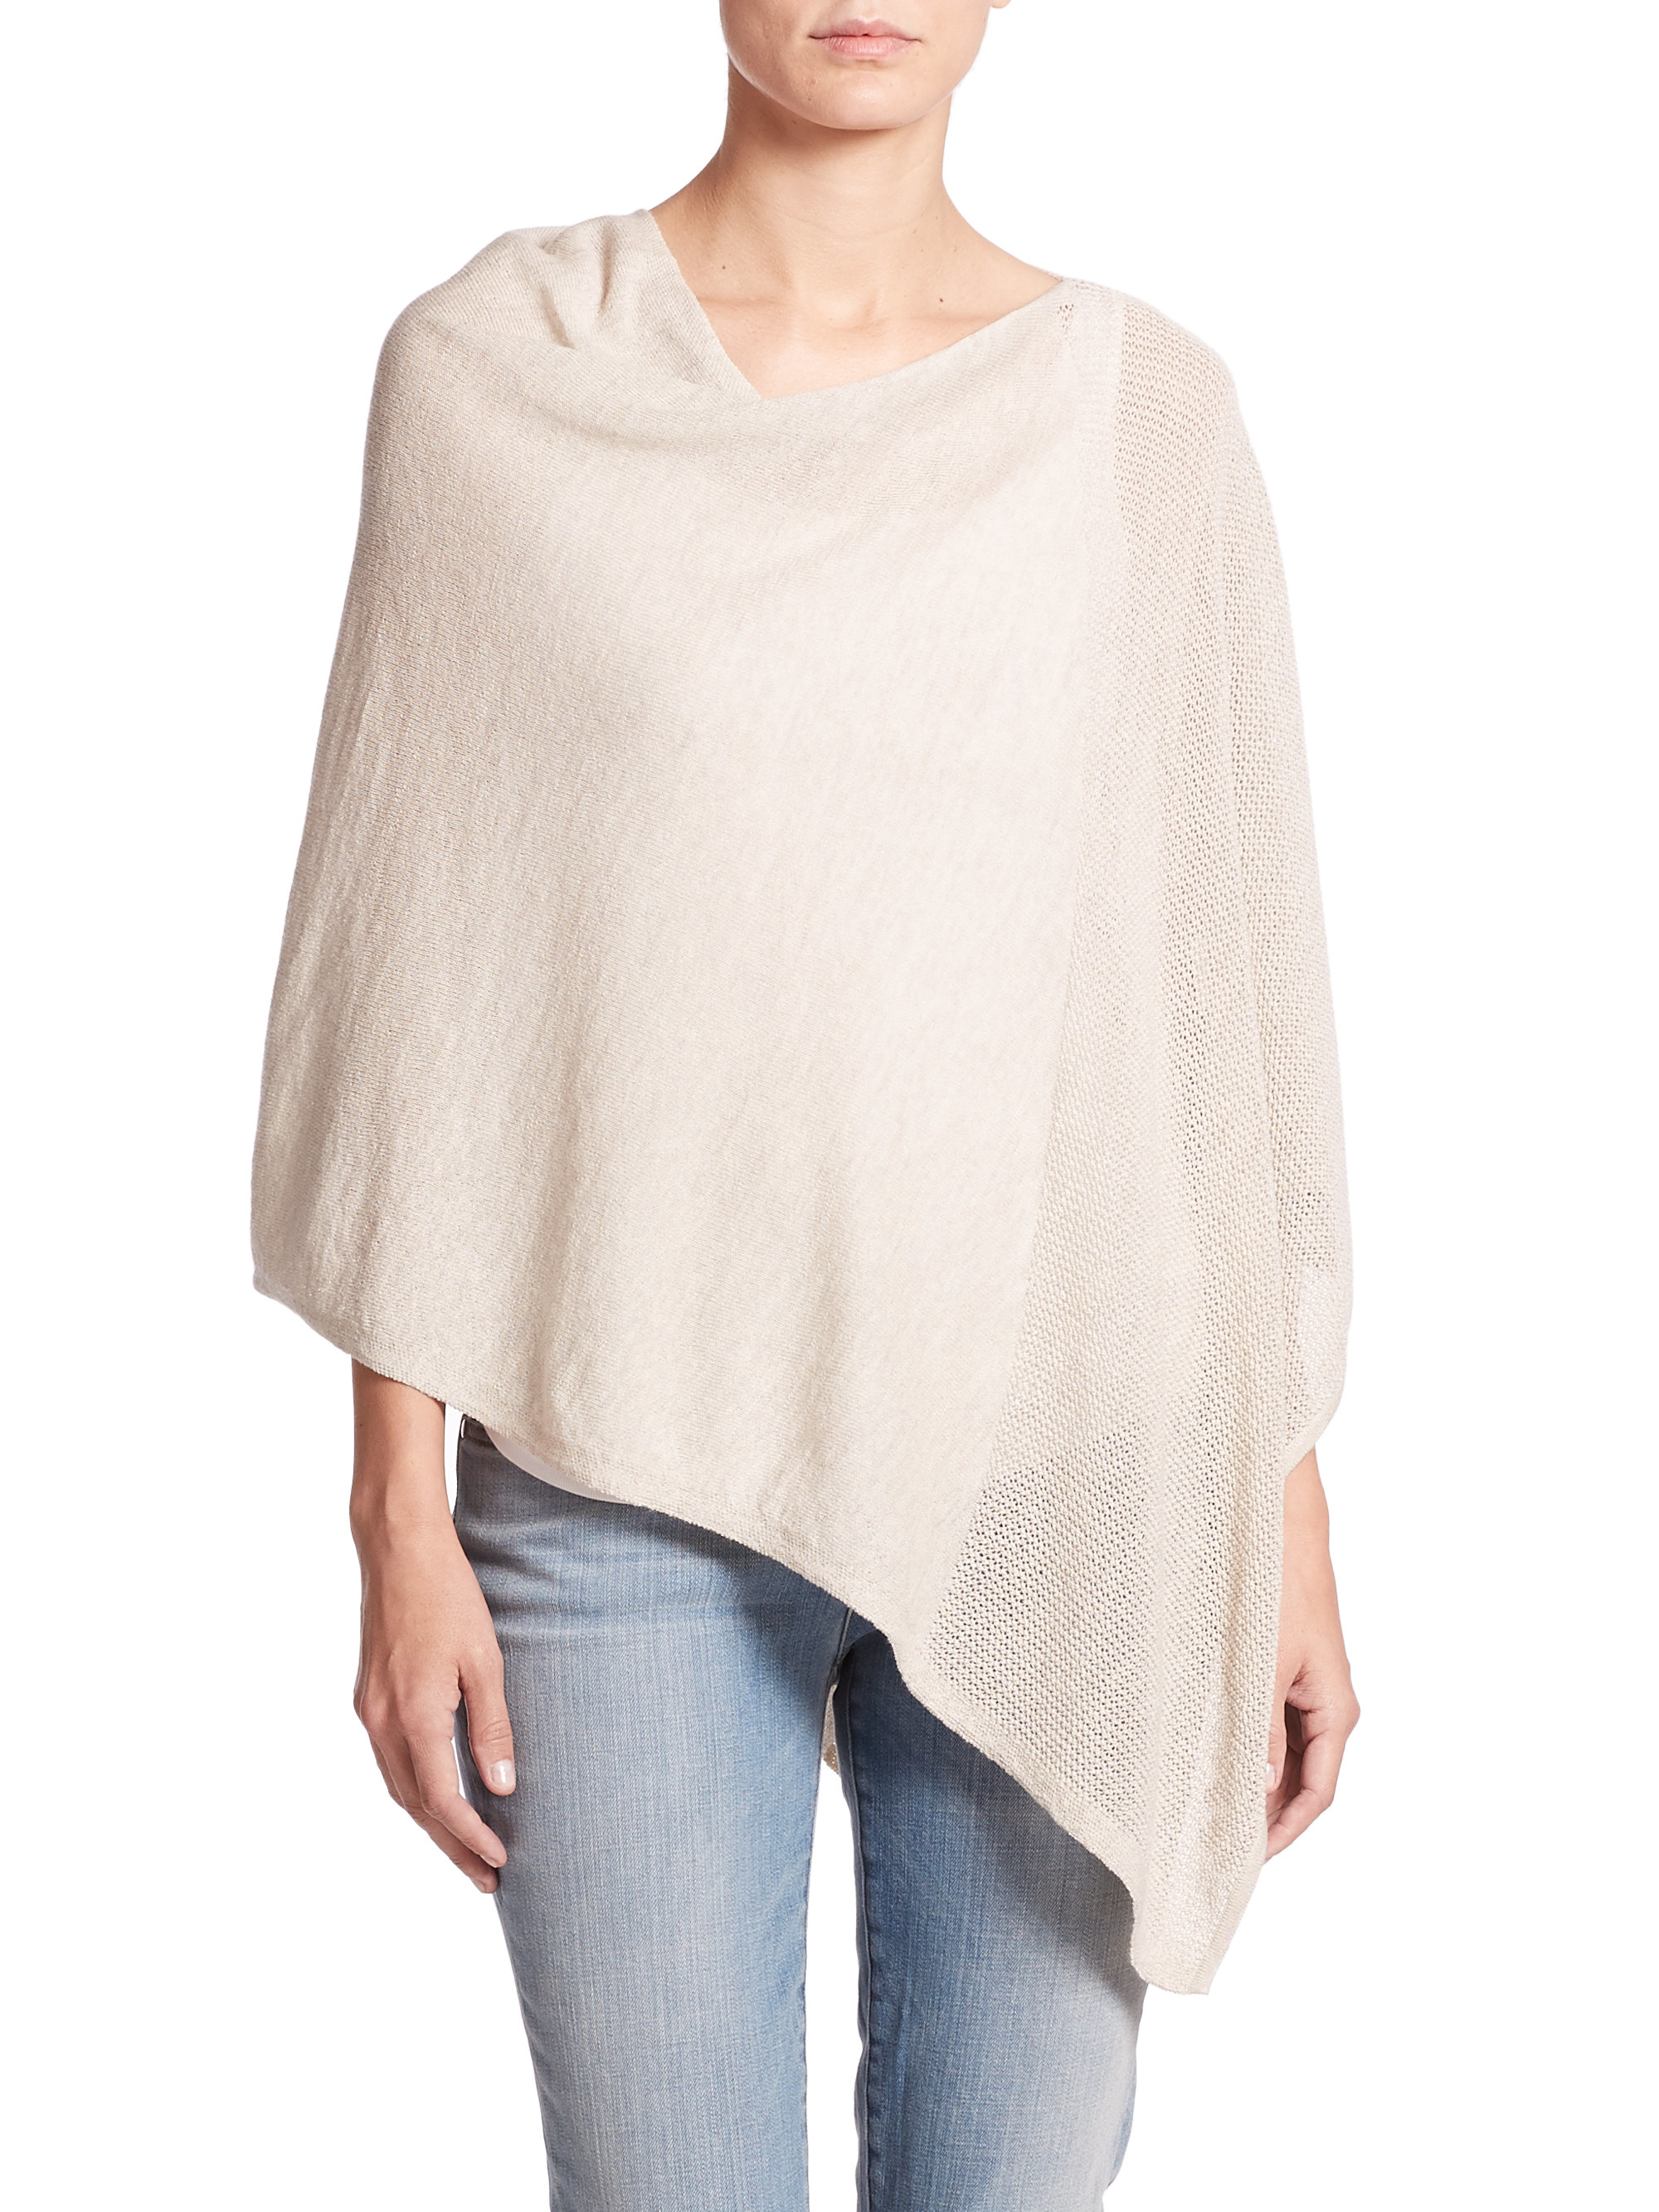 Lyst - Eileen Fisher Asymmetrical Wool Poncho in Natural